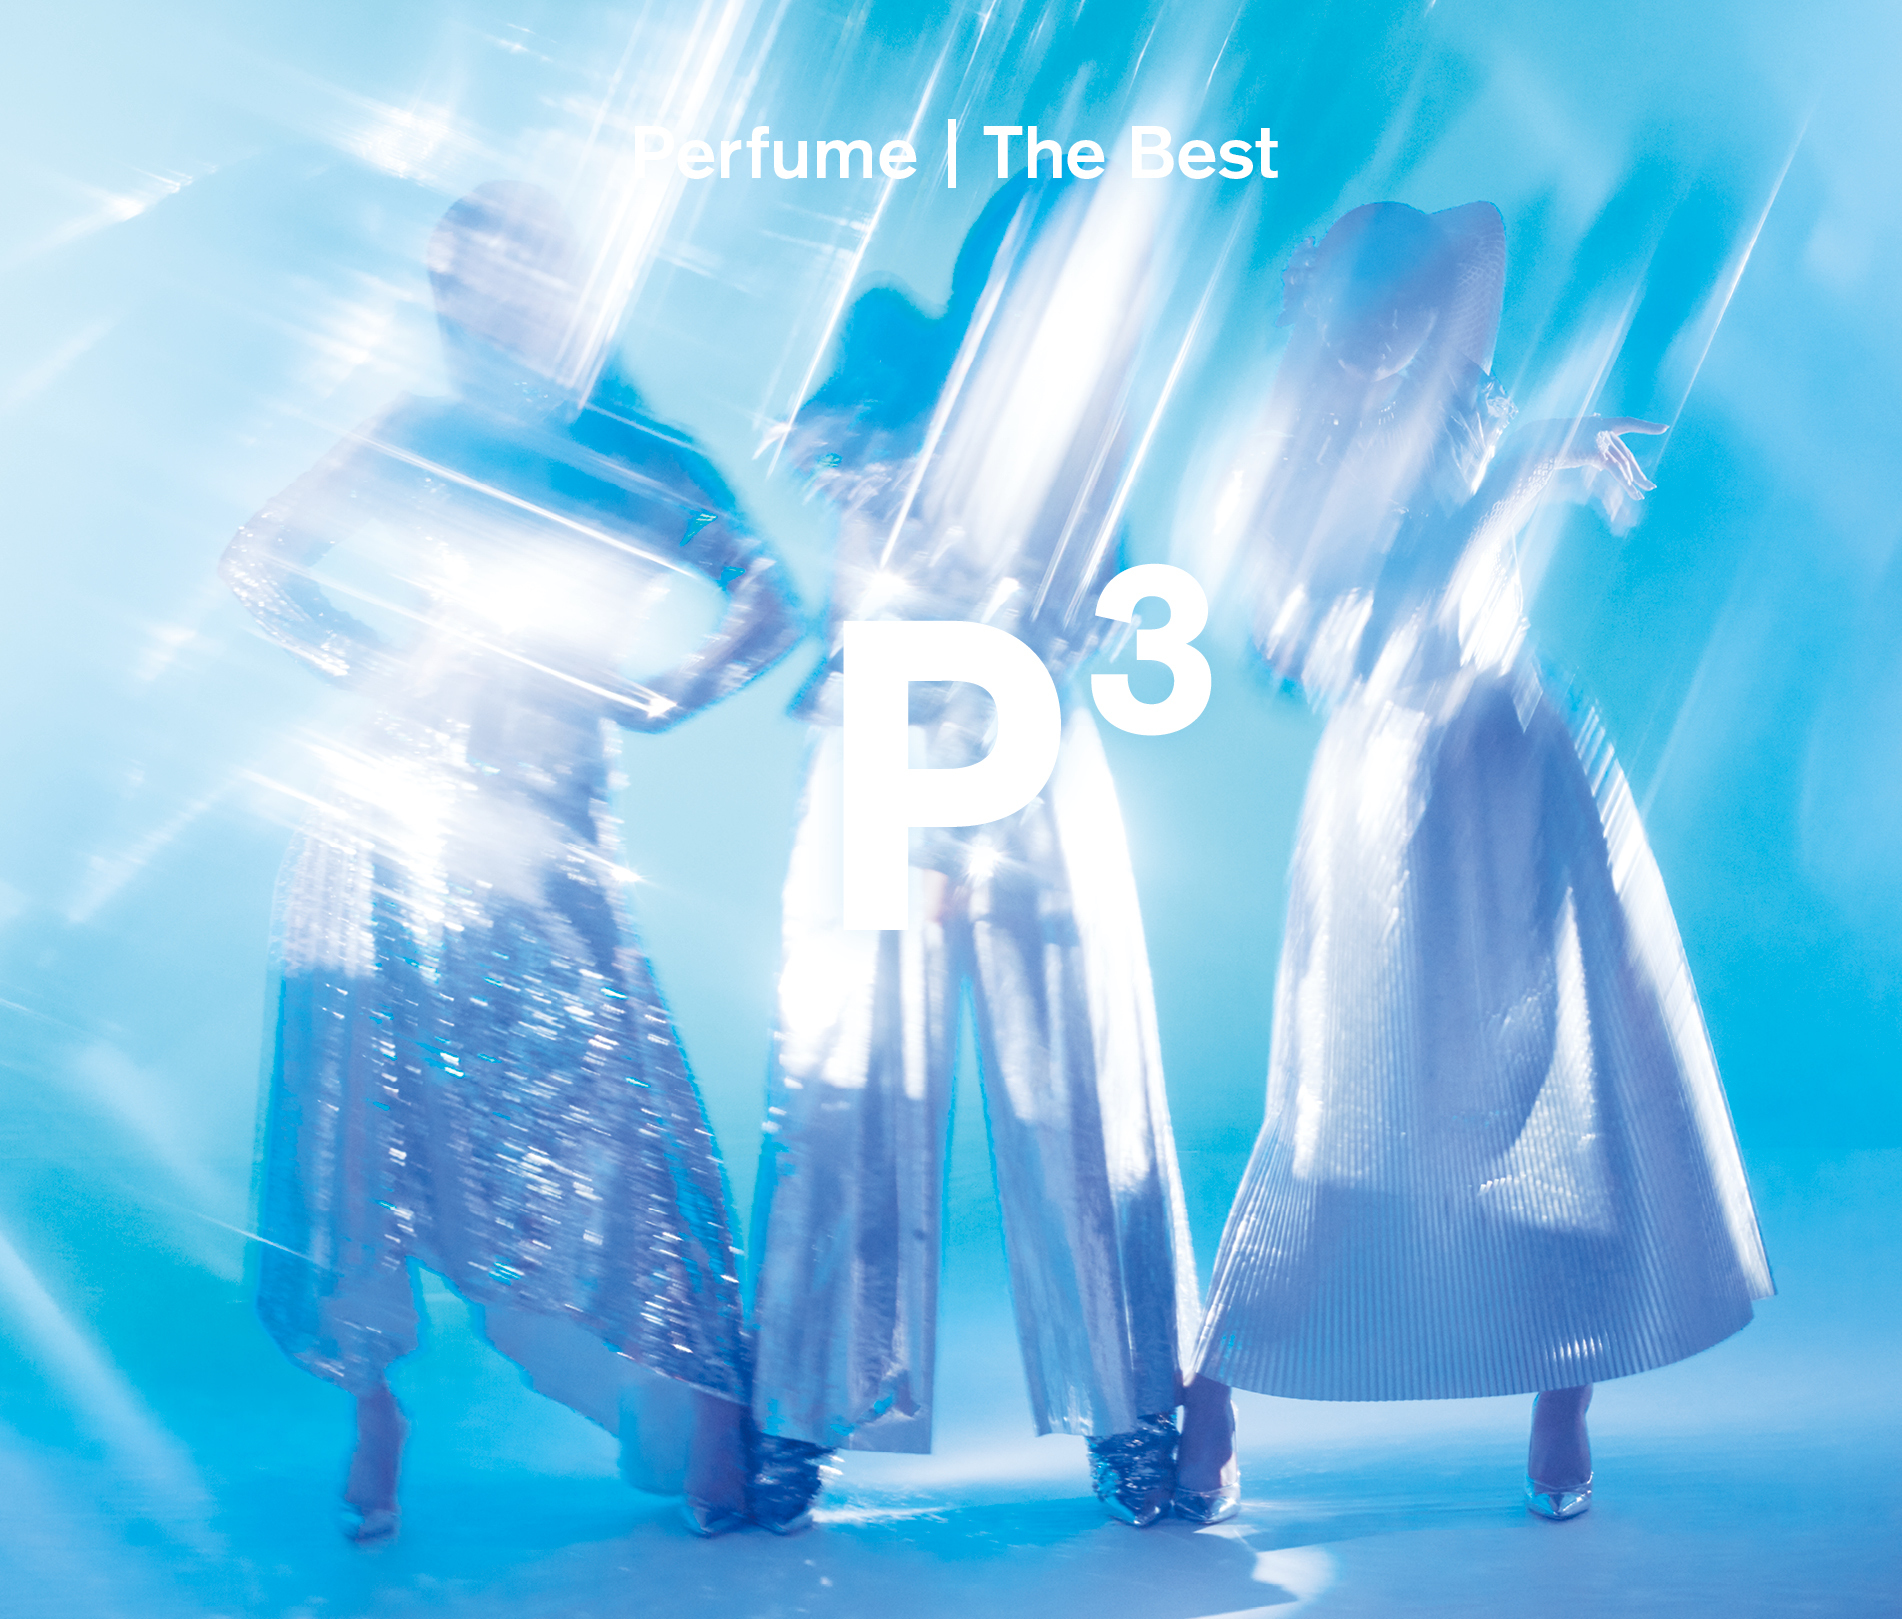 『Perfume The Best "P Cubed"』通常盤